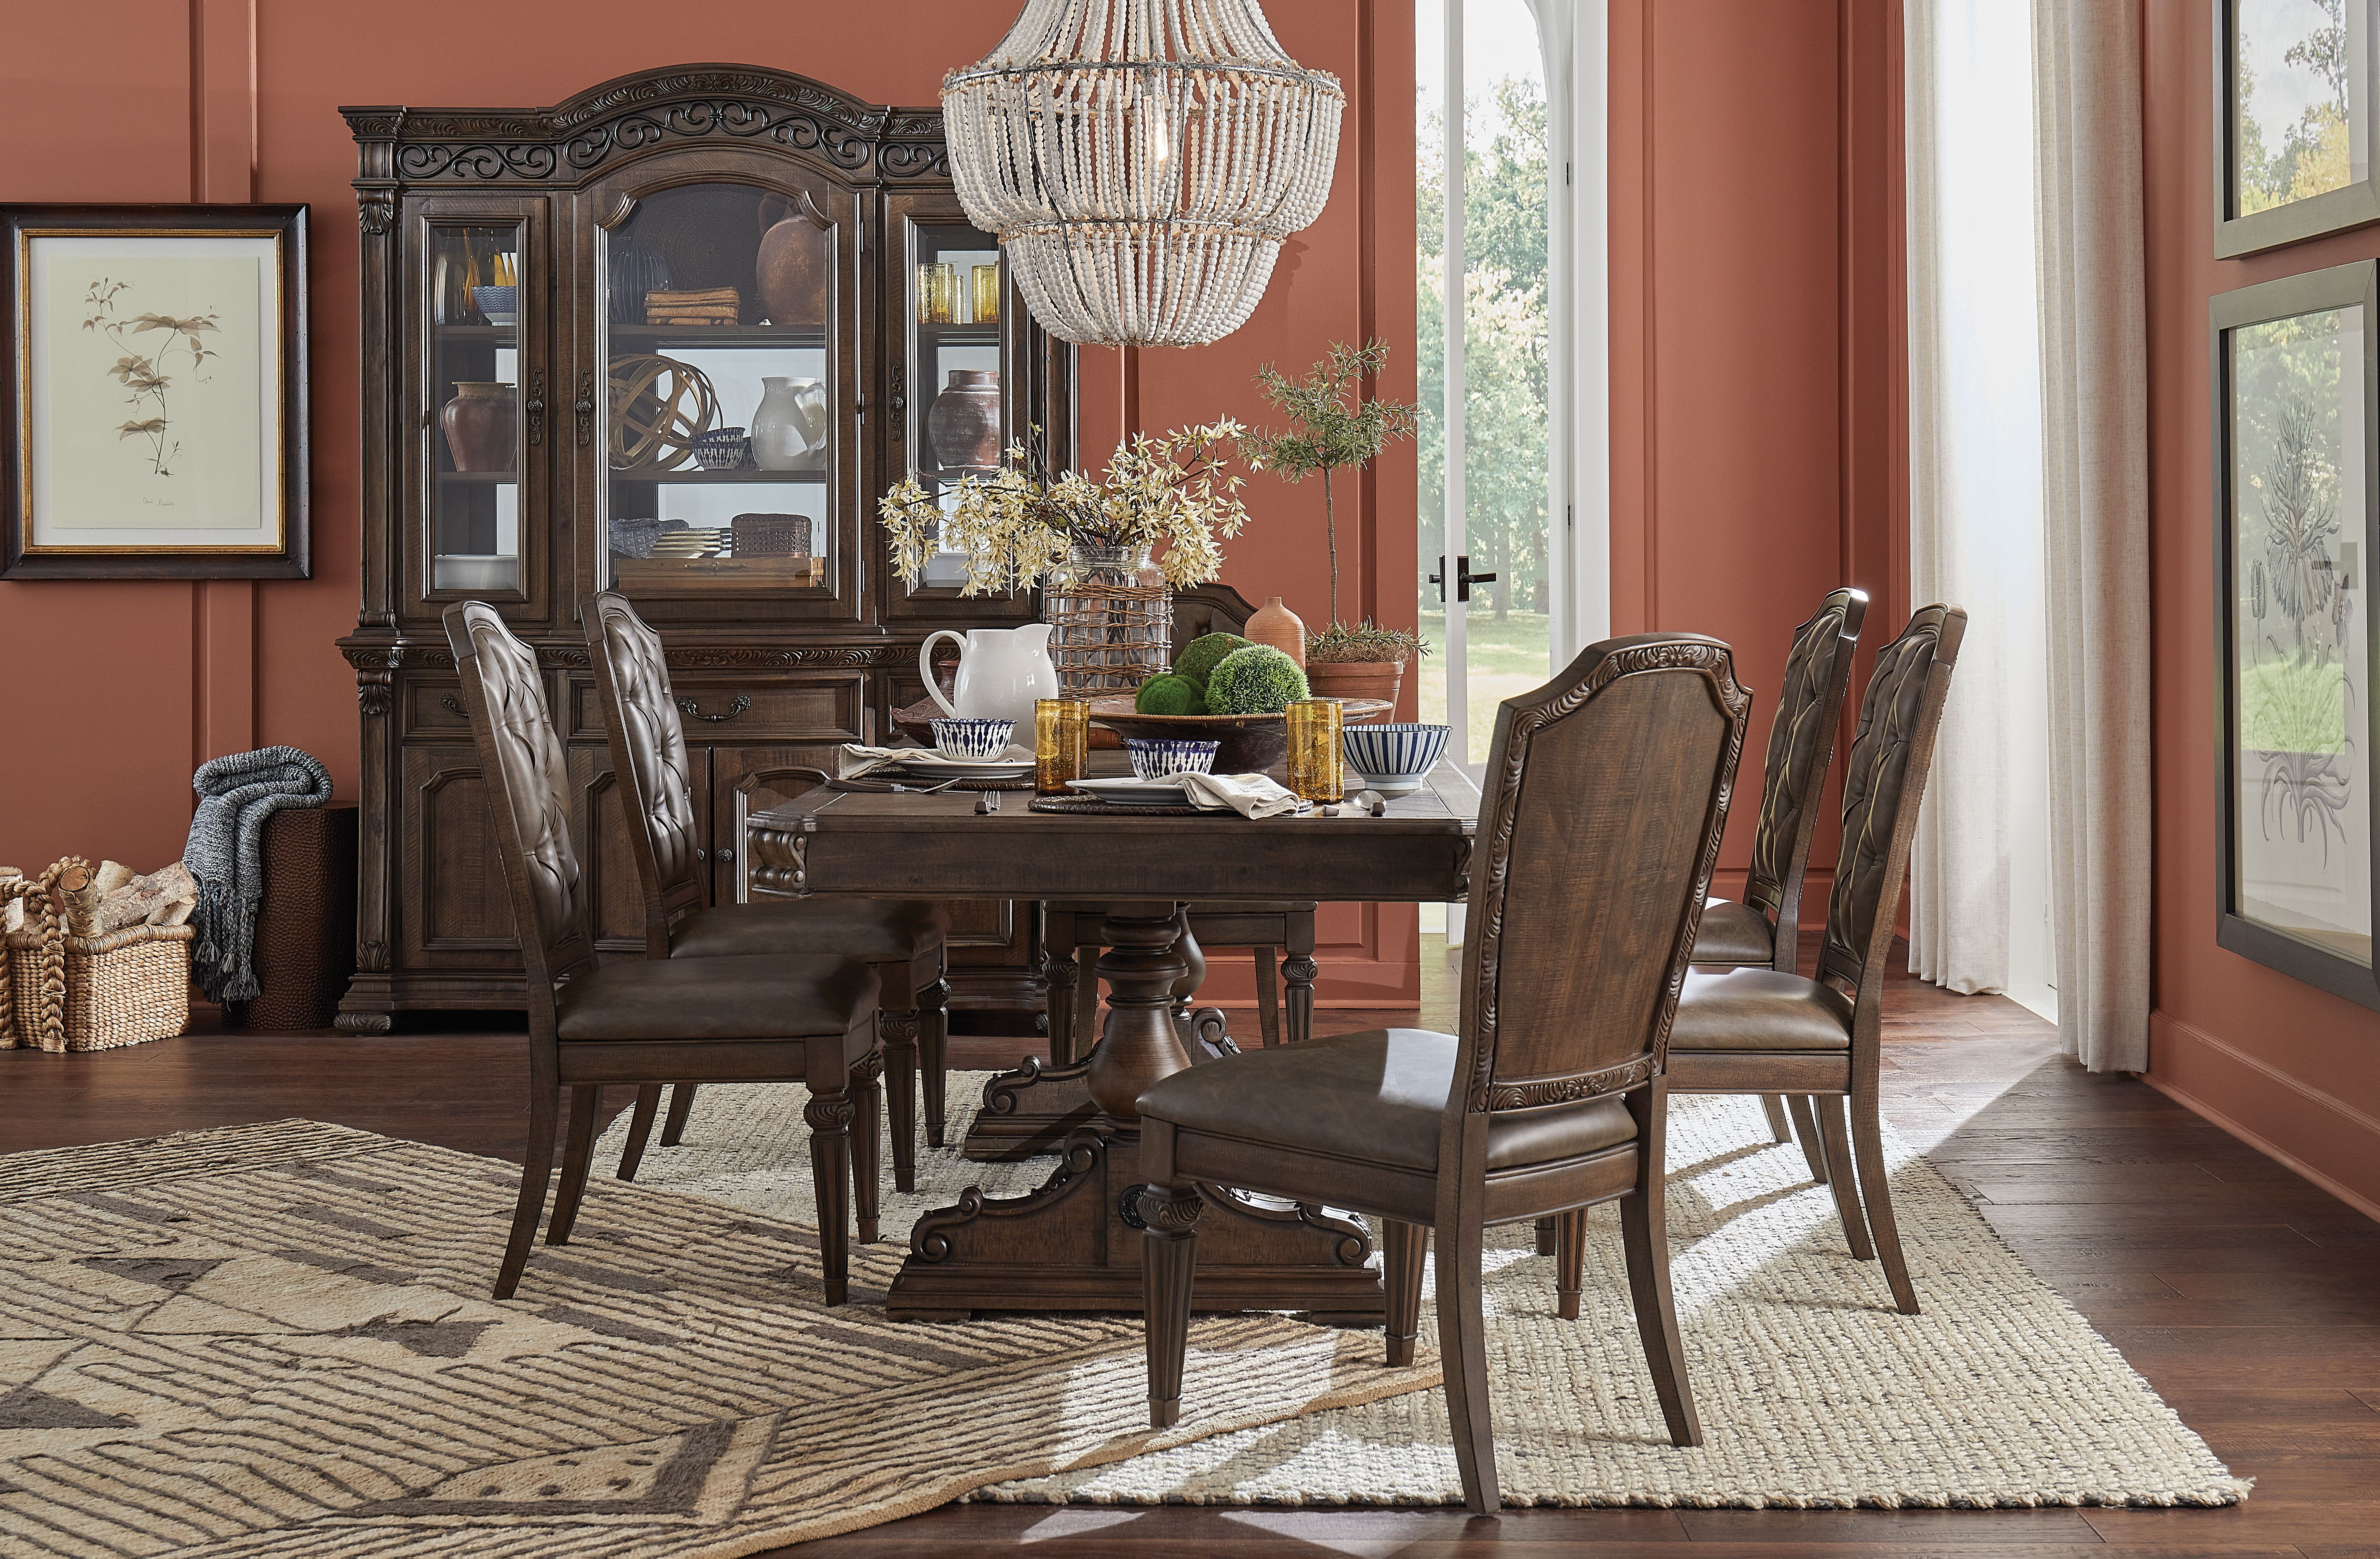 Durango - Wood Dining Side Chair With Upholstered Seat and Back (Set of 2) - Willadeene Brown